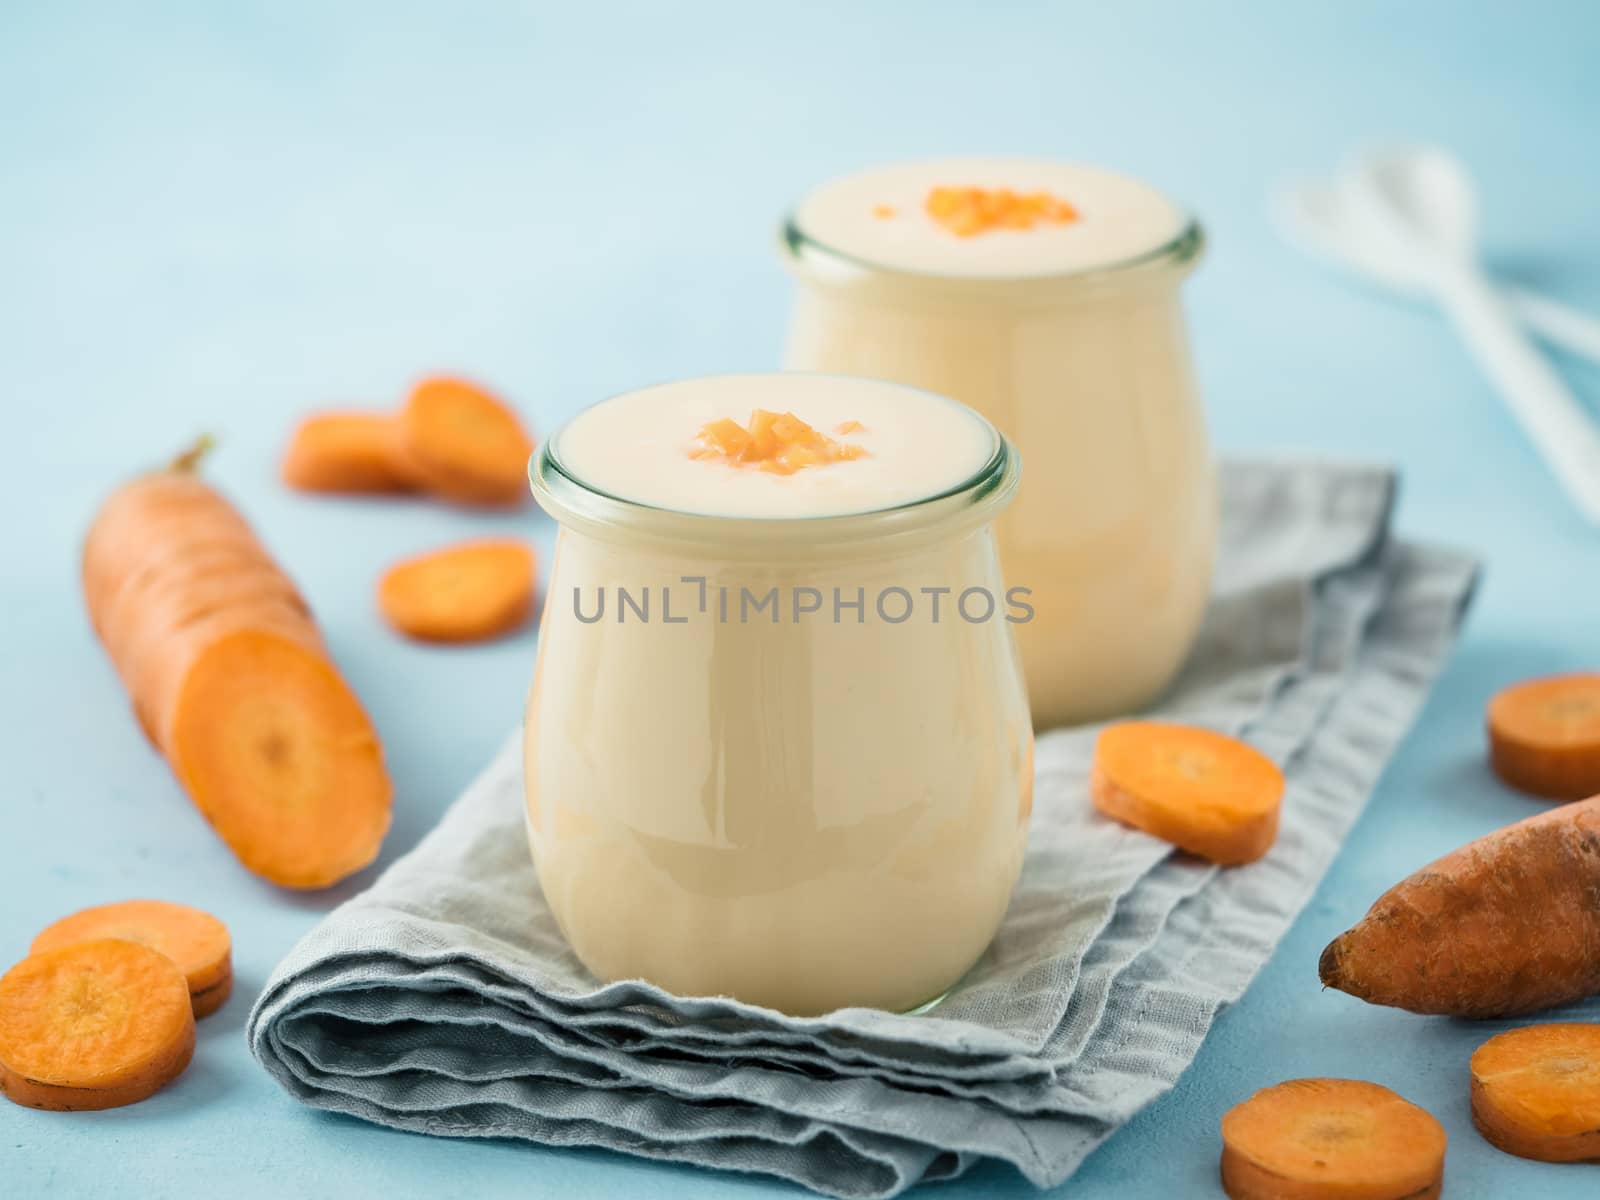 Yogurt with carrot. Vegetable yogurt. Two glass jar with yellow orange yoghurt or milkshake and fresh carrot on blue background. Copy space for text